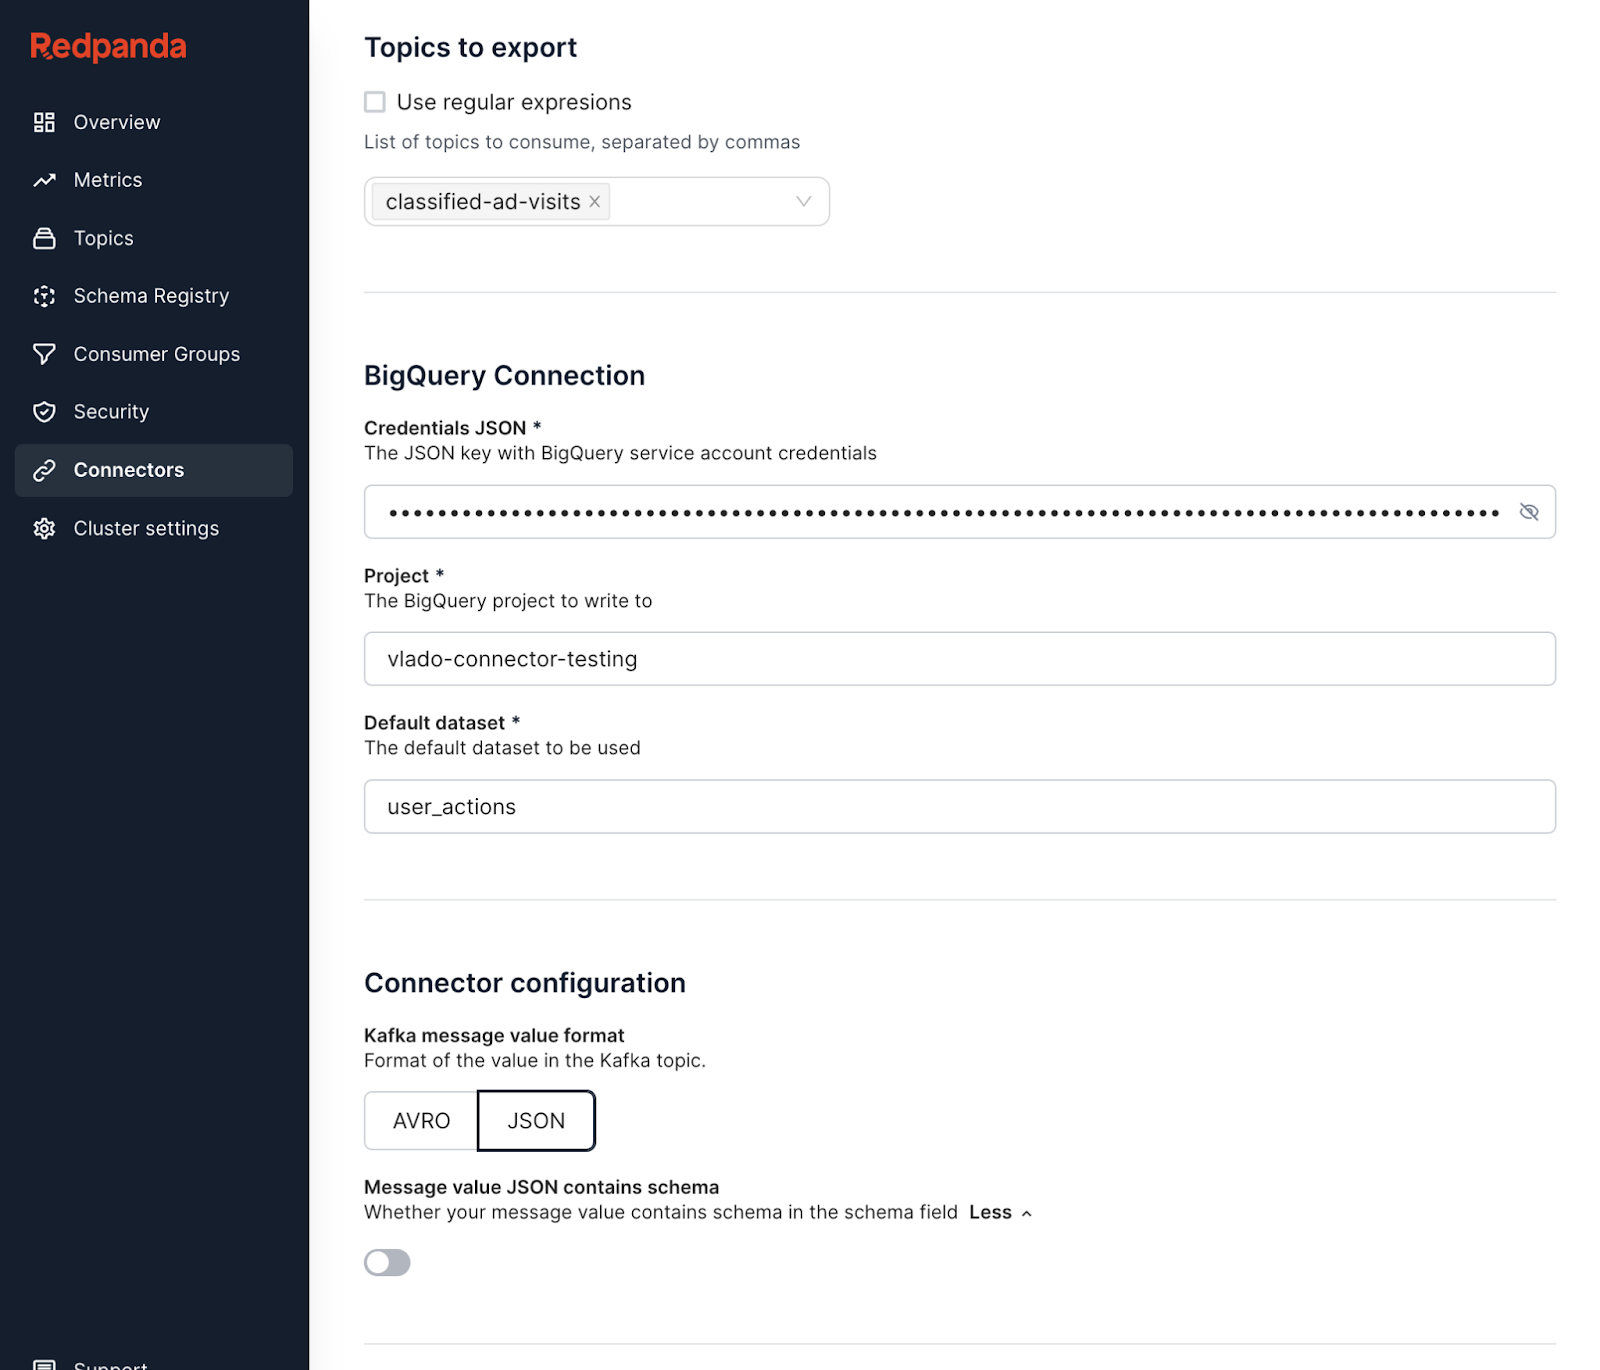 Setting up the connector using the Redpanda Cloud UI form